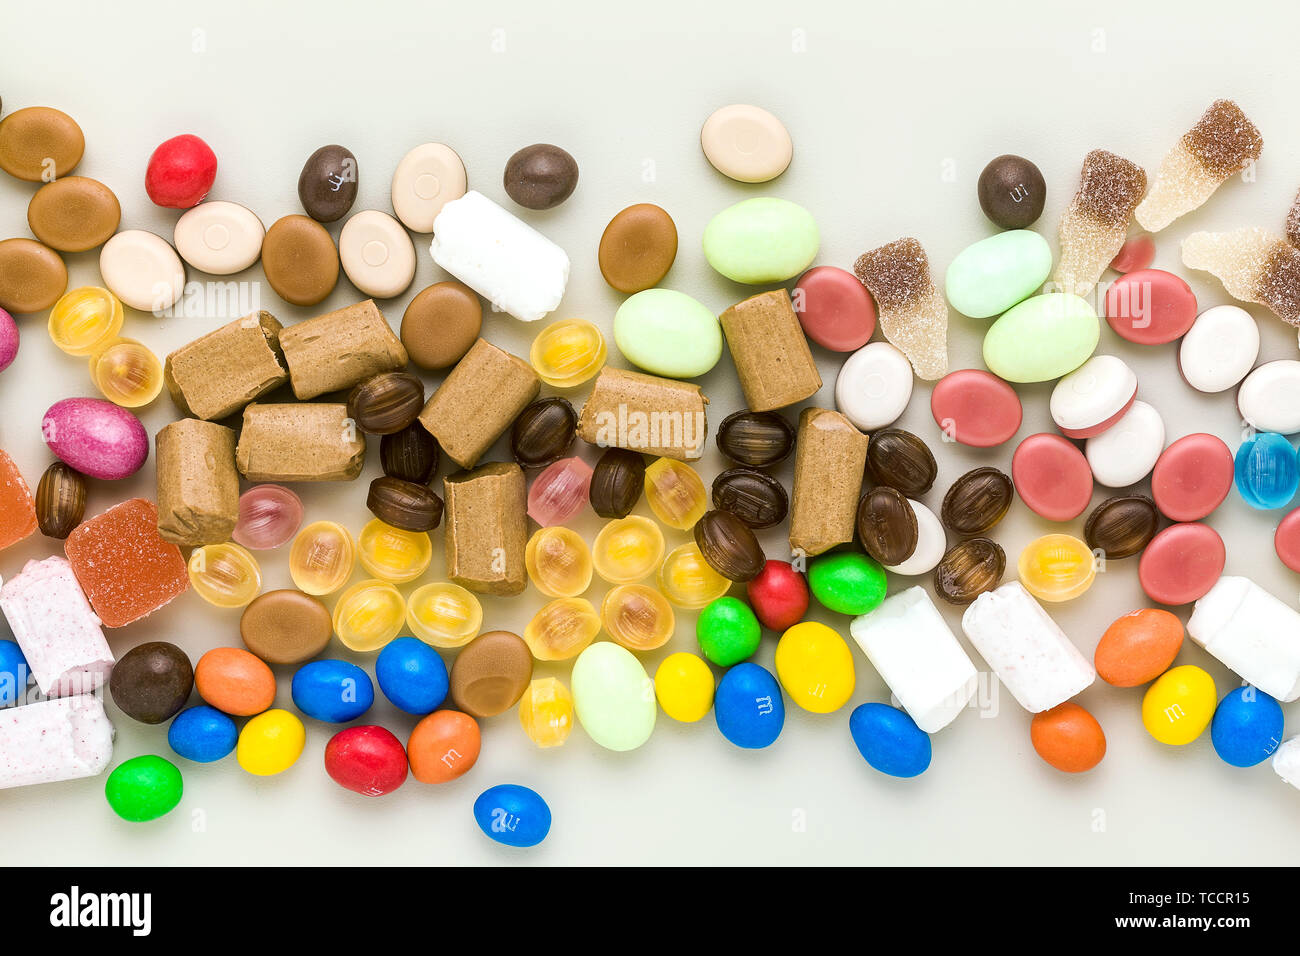 multicolored caramel candies scattered on the table background. sugar products. colored sweets Stock Photo